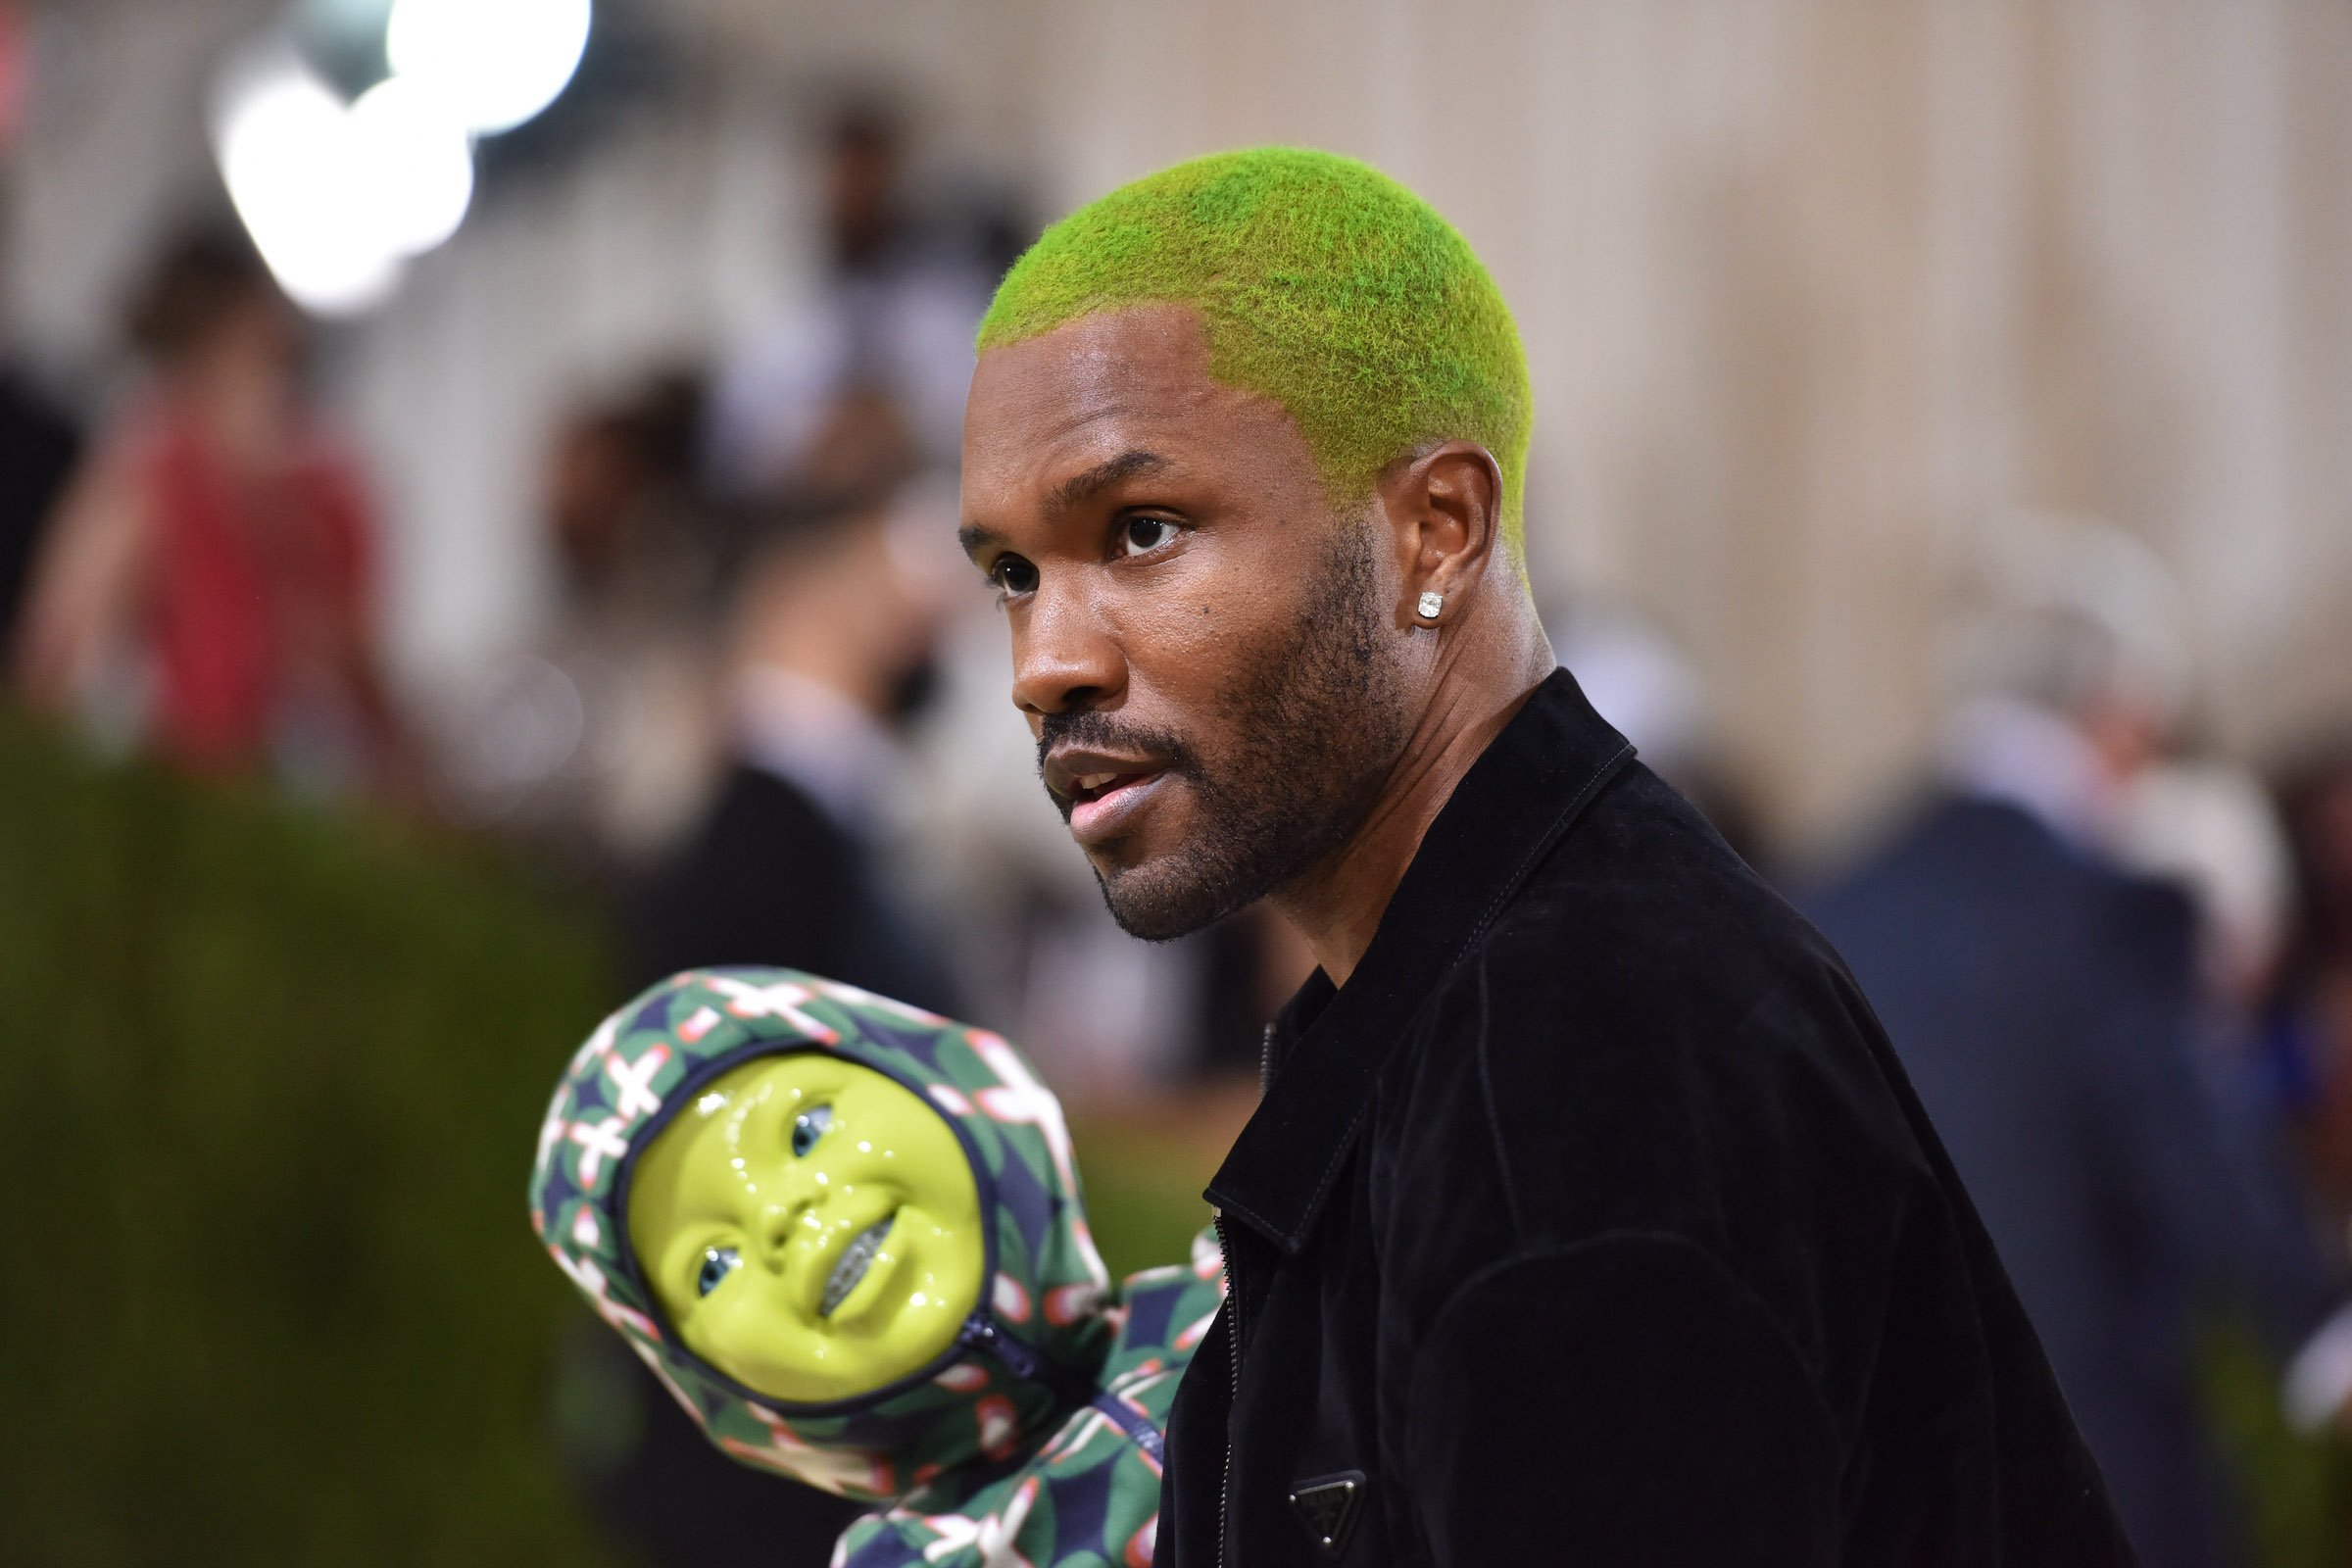 Frank Ocean, who is currently writing and directing a movie with A24, wearing a black suit and holding a green baby doll